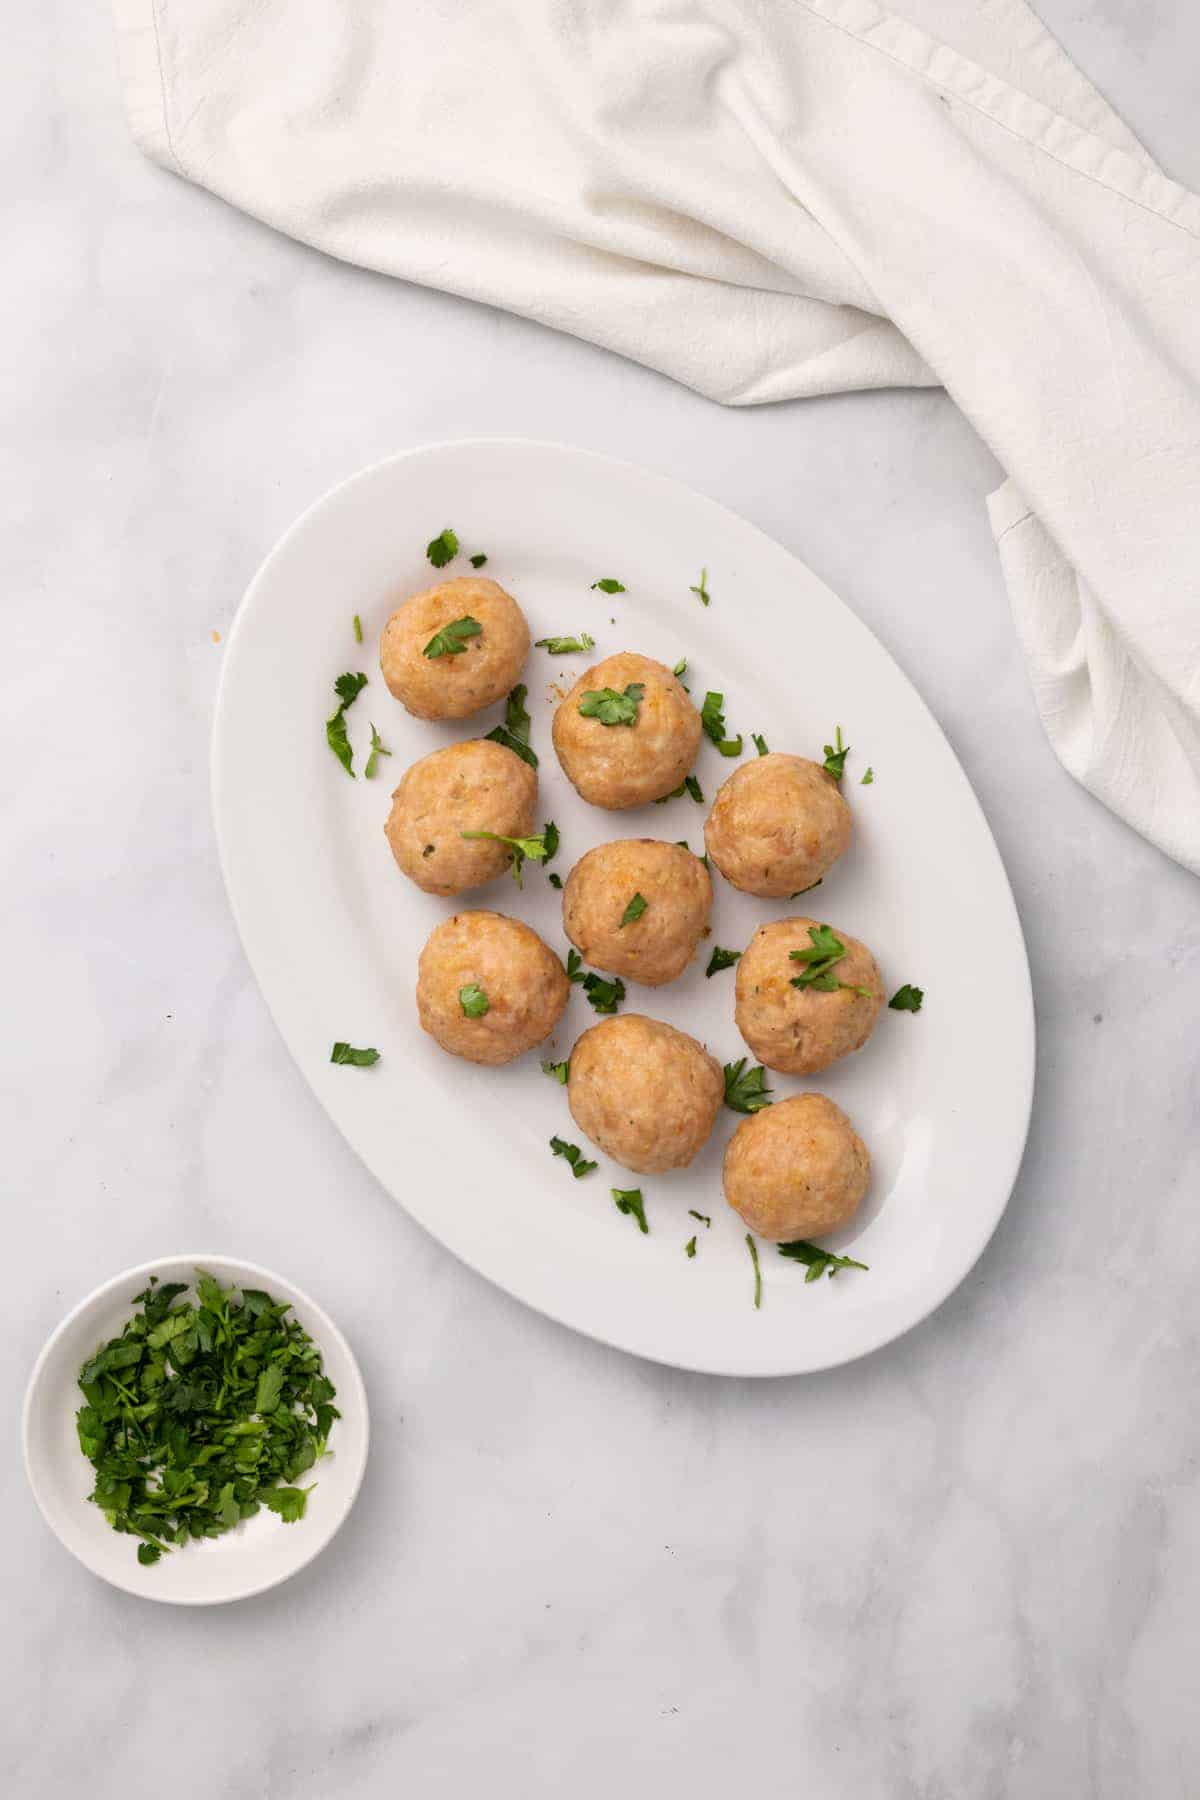 Meatballs on a white serving platter, garnished with fresh parsley, as seen from above